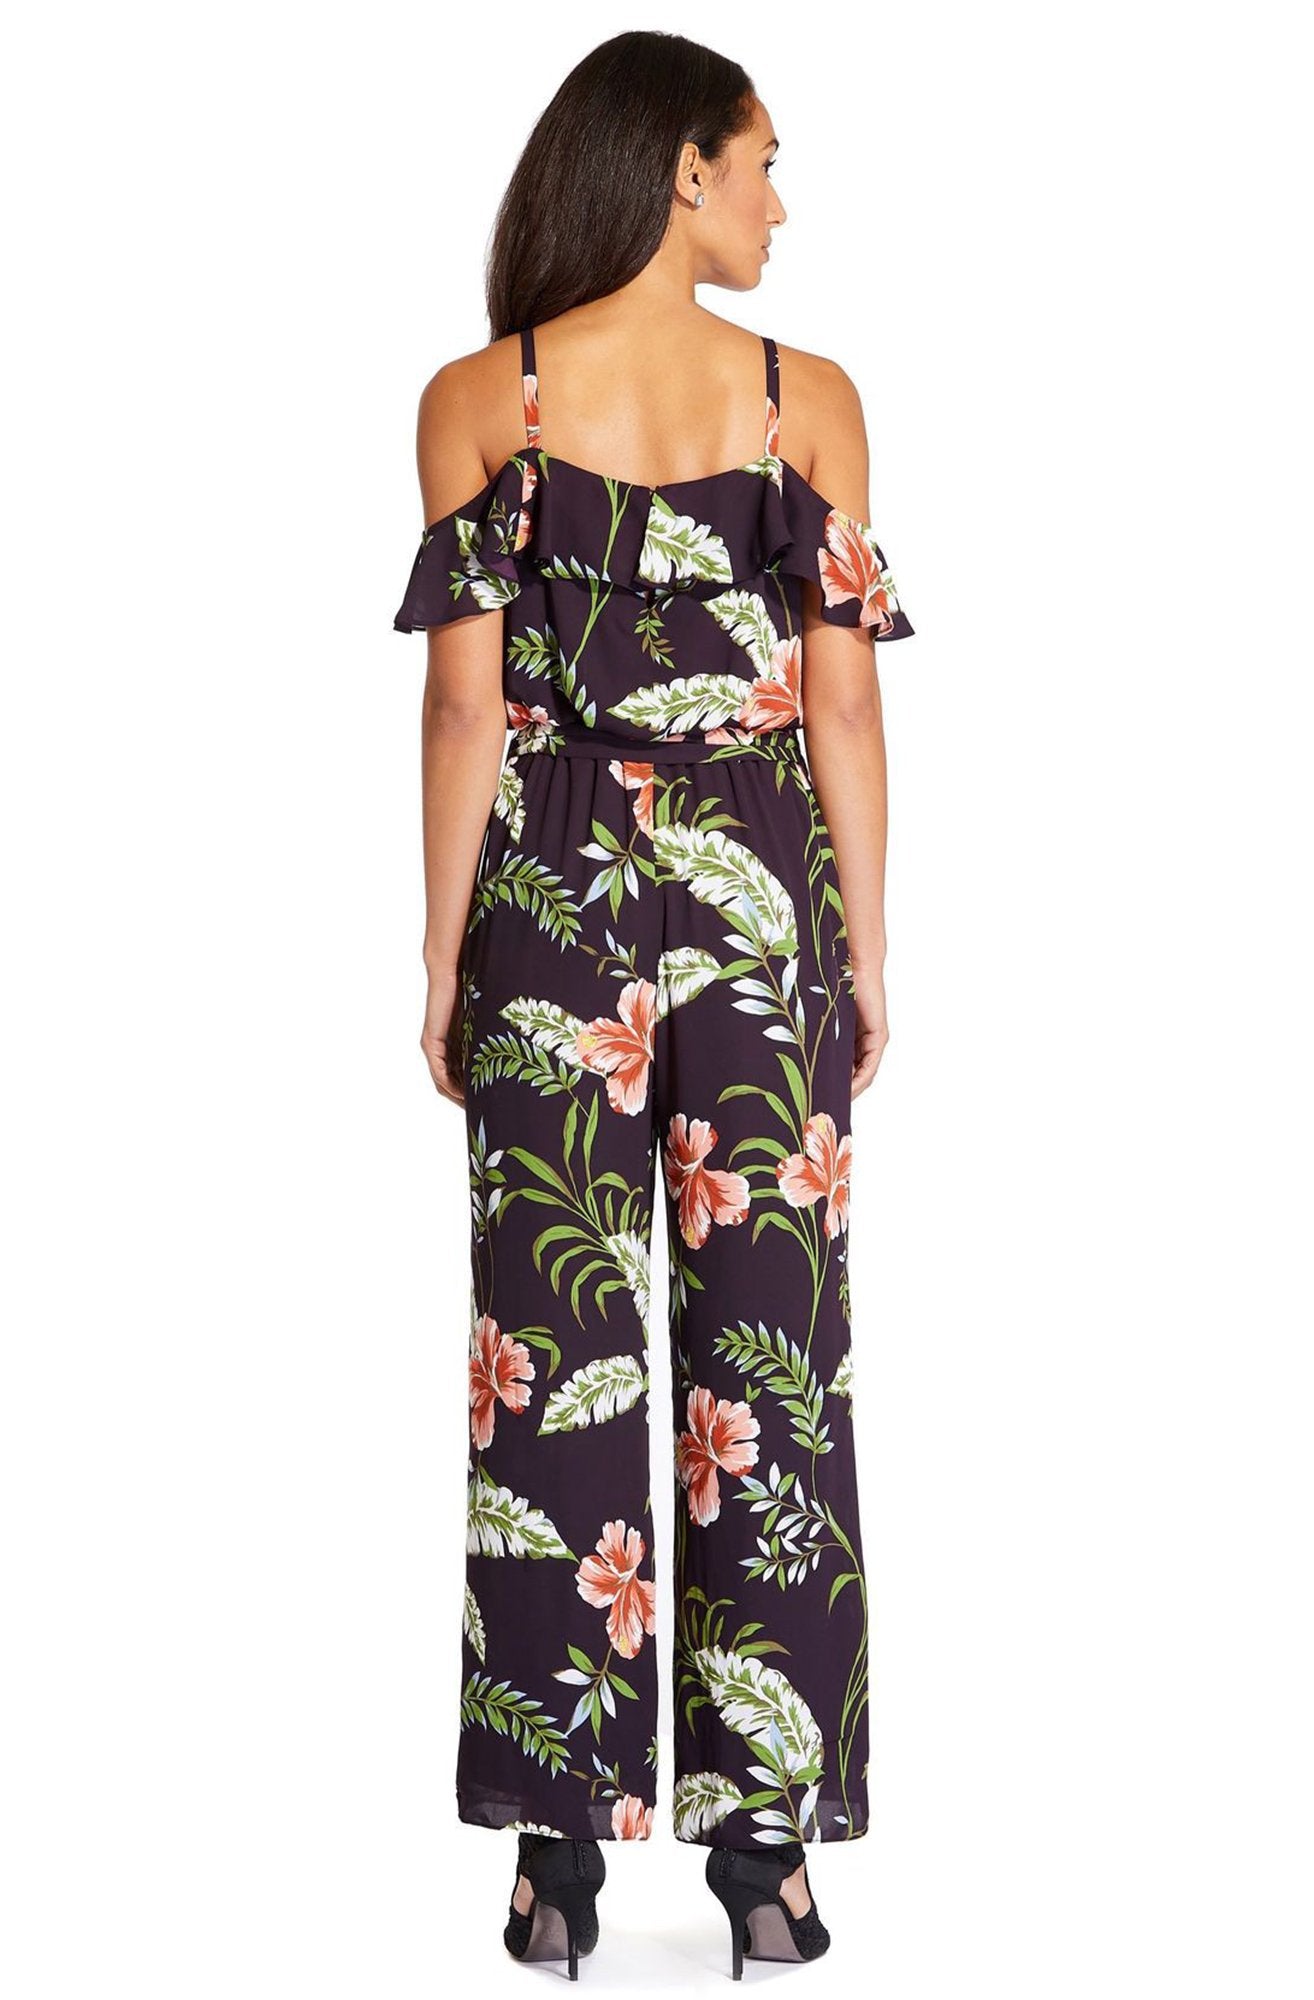 Adrianna Papell - AP1D103372 Floral Print V-neck Jumpsuit In Purple and Multi-Color